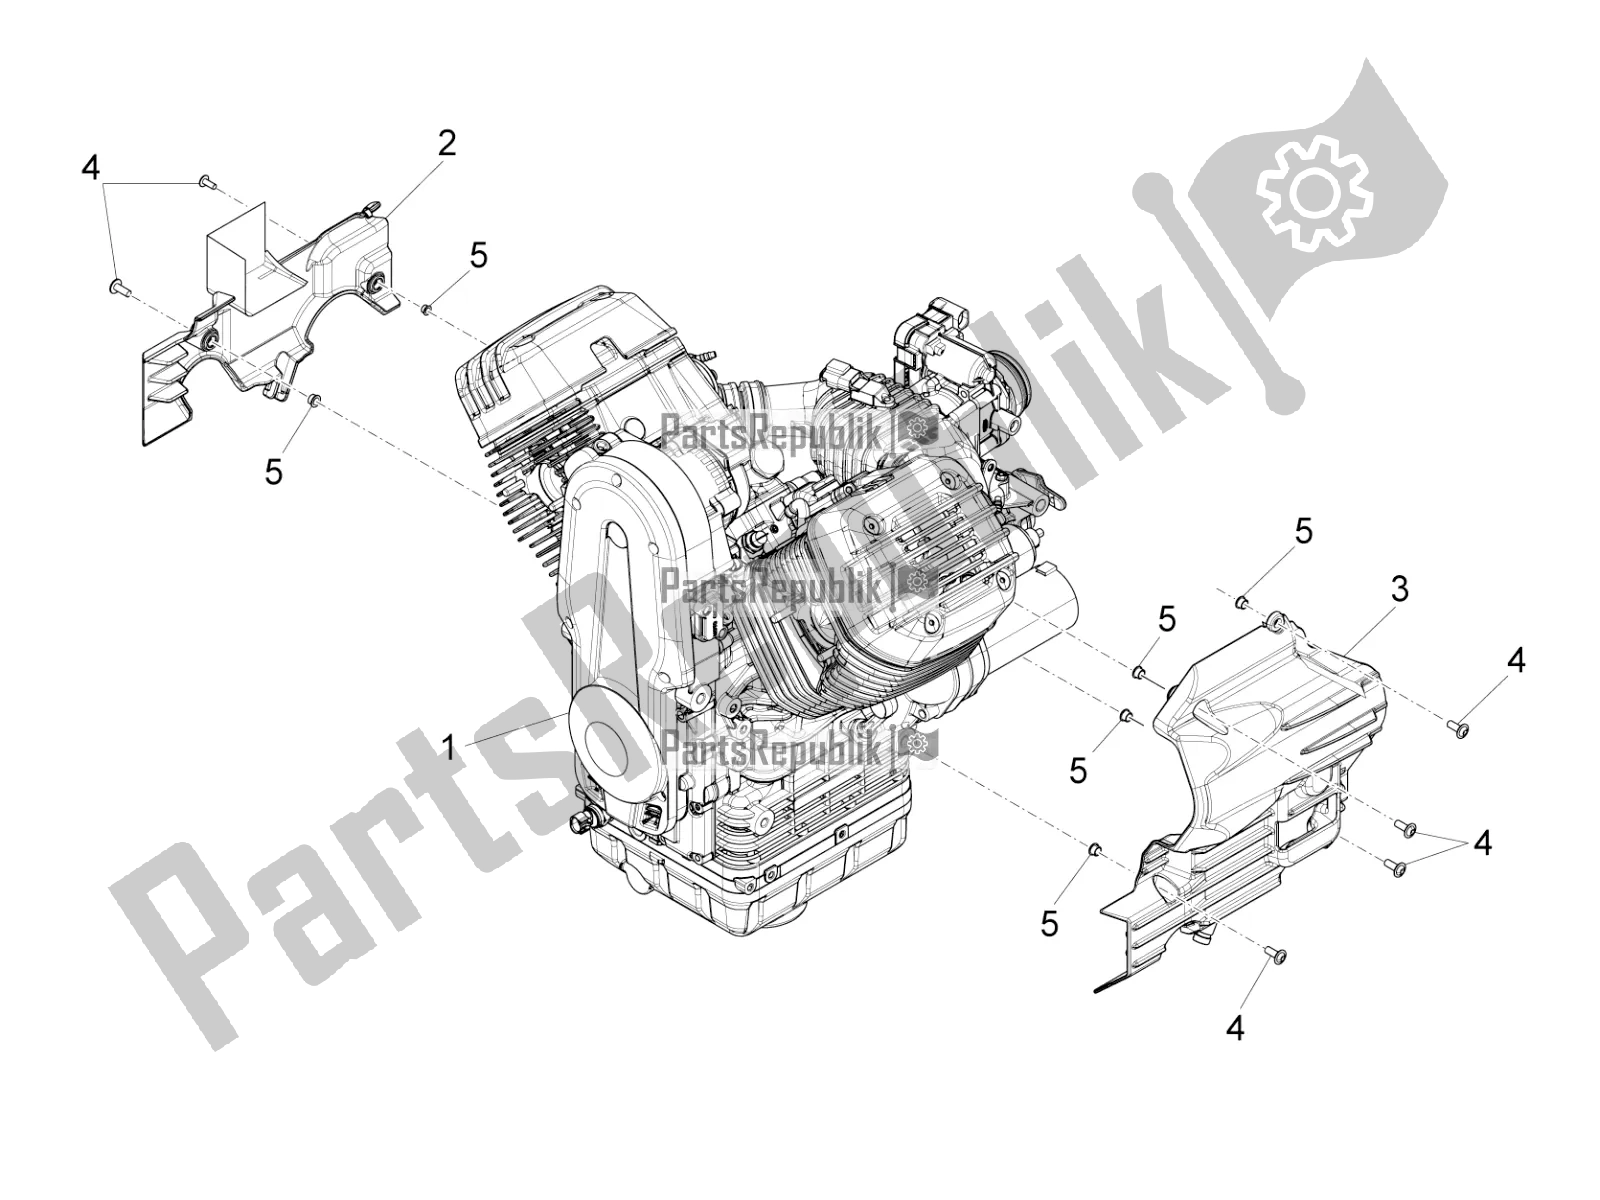 All parts for the Engine-completing Part-lever of the Moto-Guzzi Eldorado 1400 ABS USA 2021